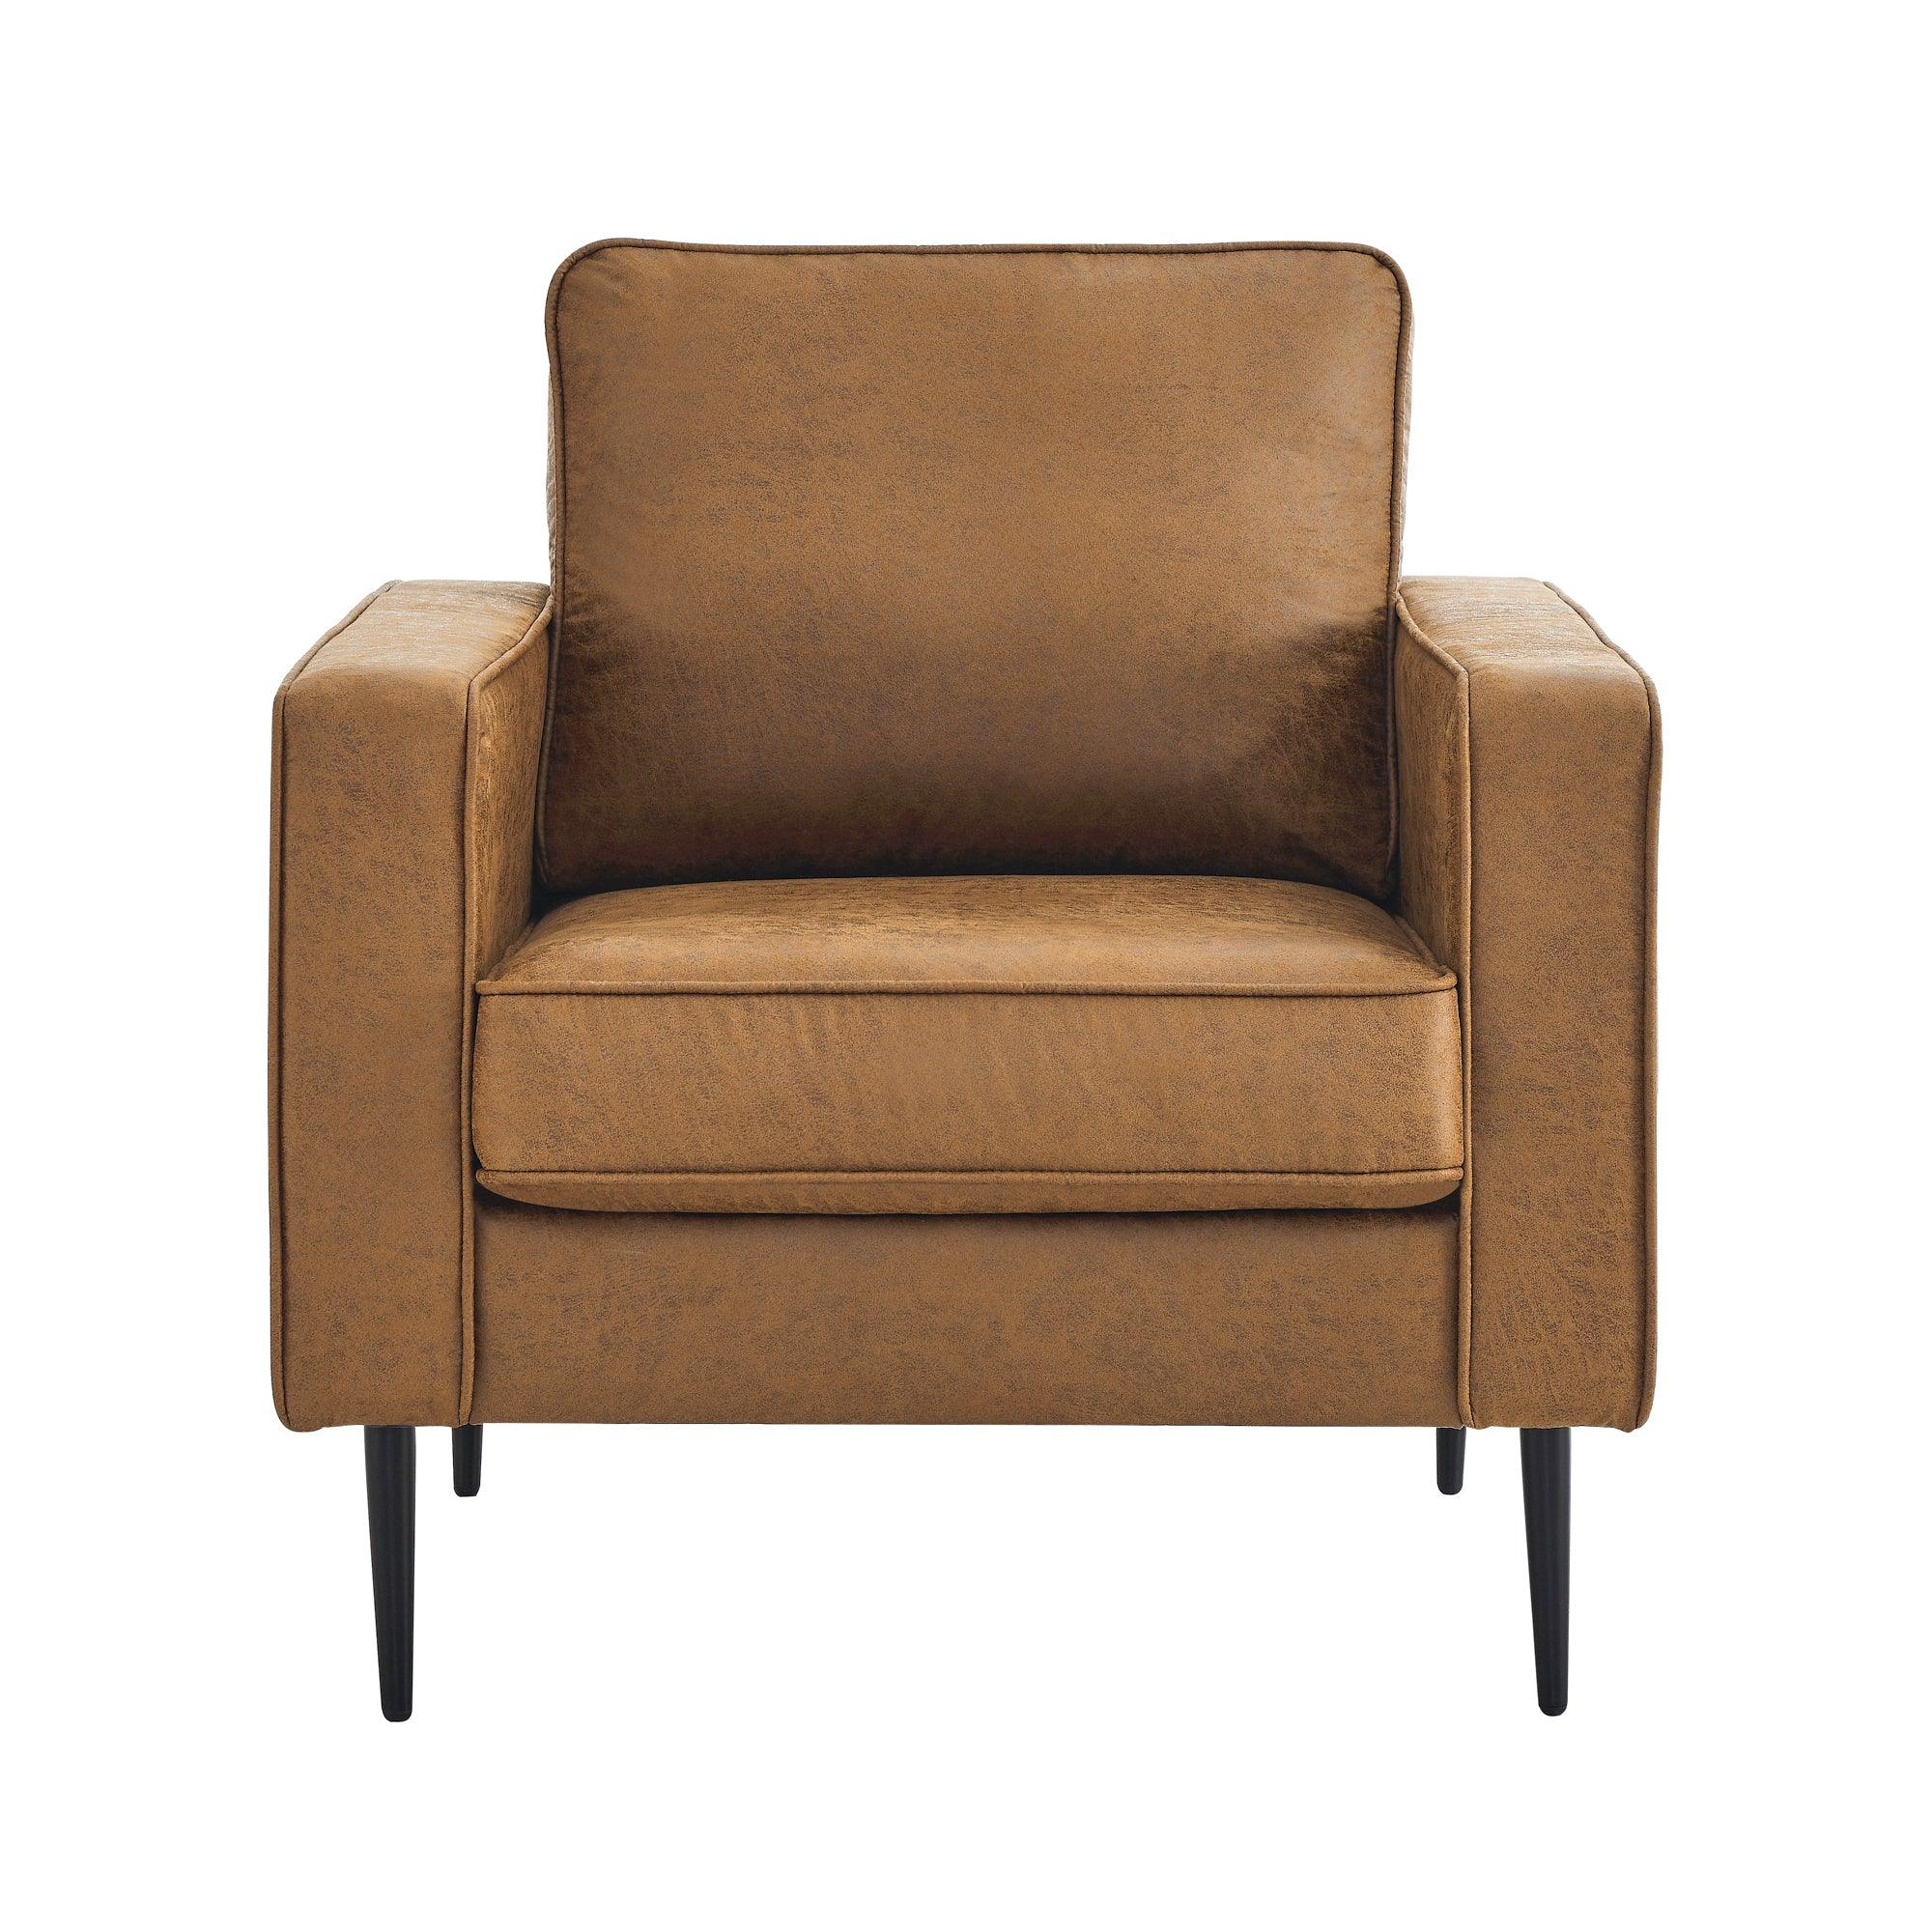 🆓🚛 33"Mid-Century Modern Armchair Couch With High-Tech Fabric Surface/ Upholstered Cushions, Brown